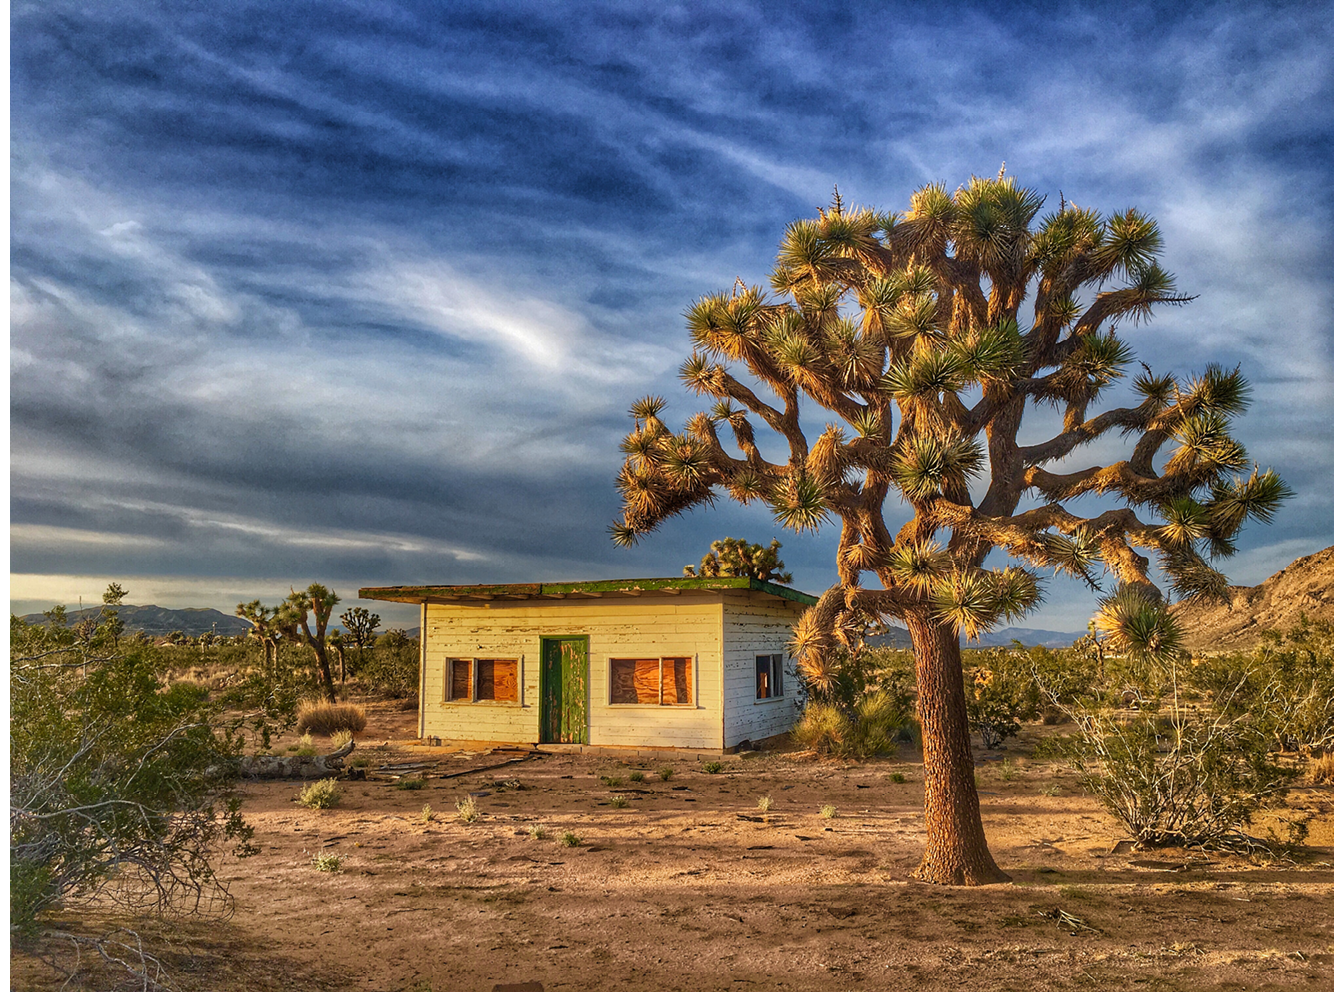 An abandoned homestead cabin with Joshua tree in front and cloudy blue sky.